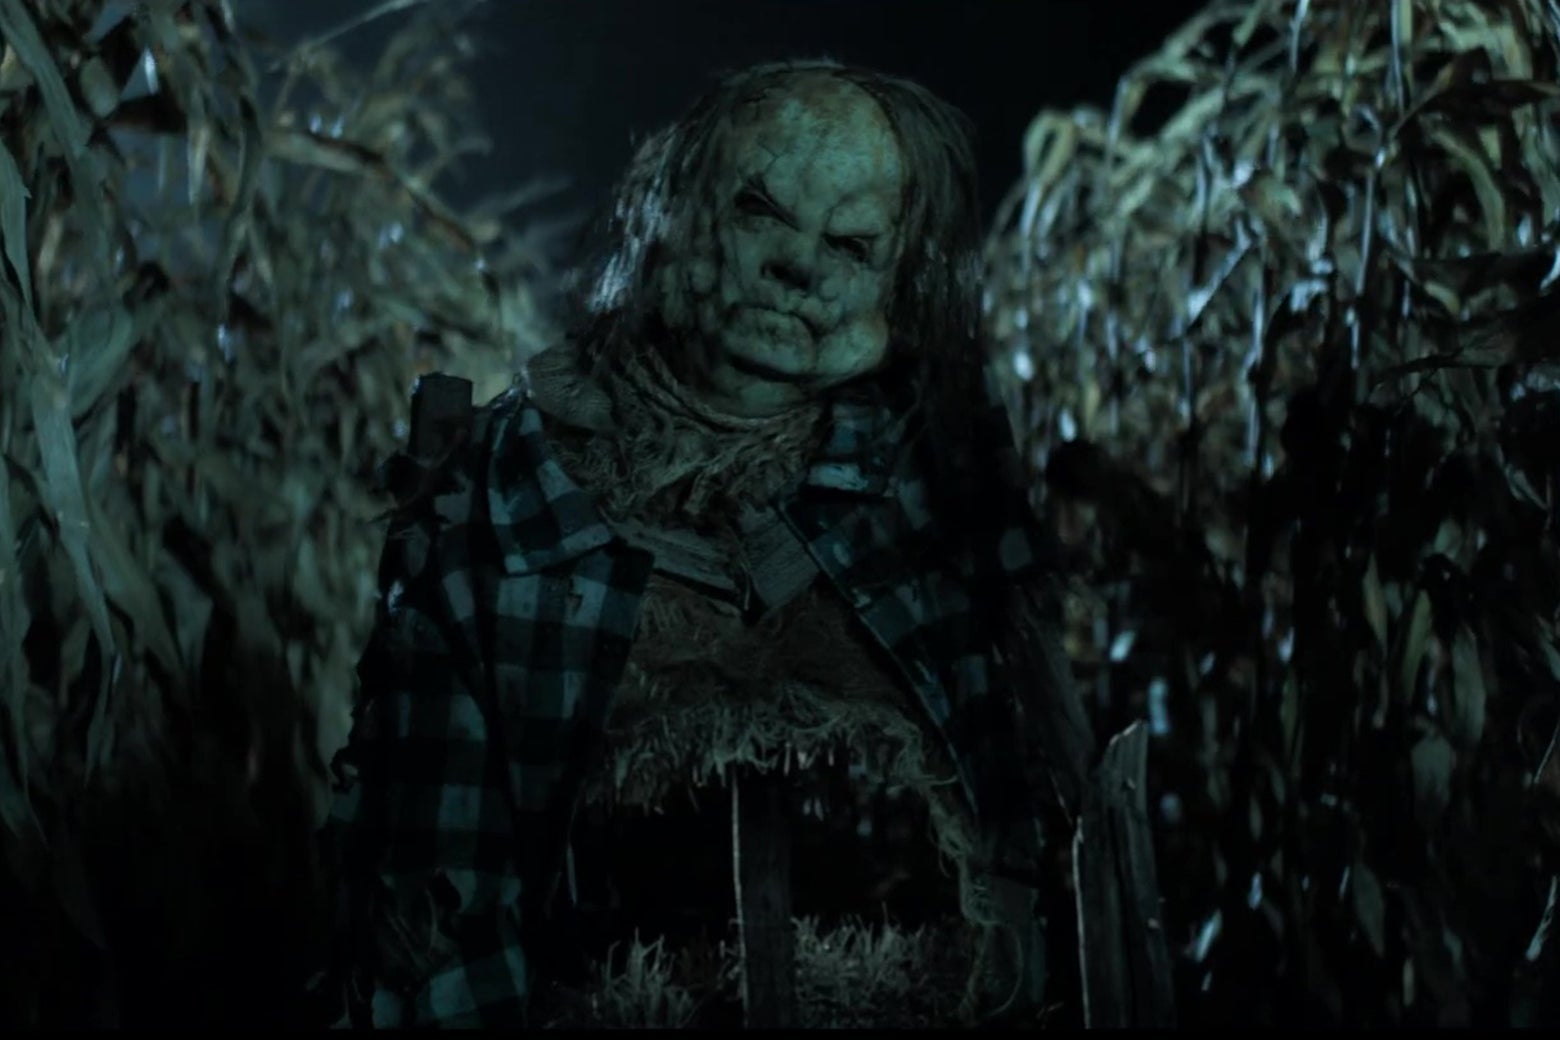 A walking scarecrow, looking like it is angry with you, personally.